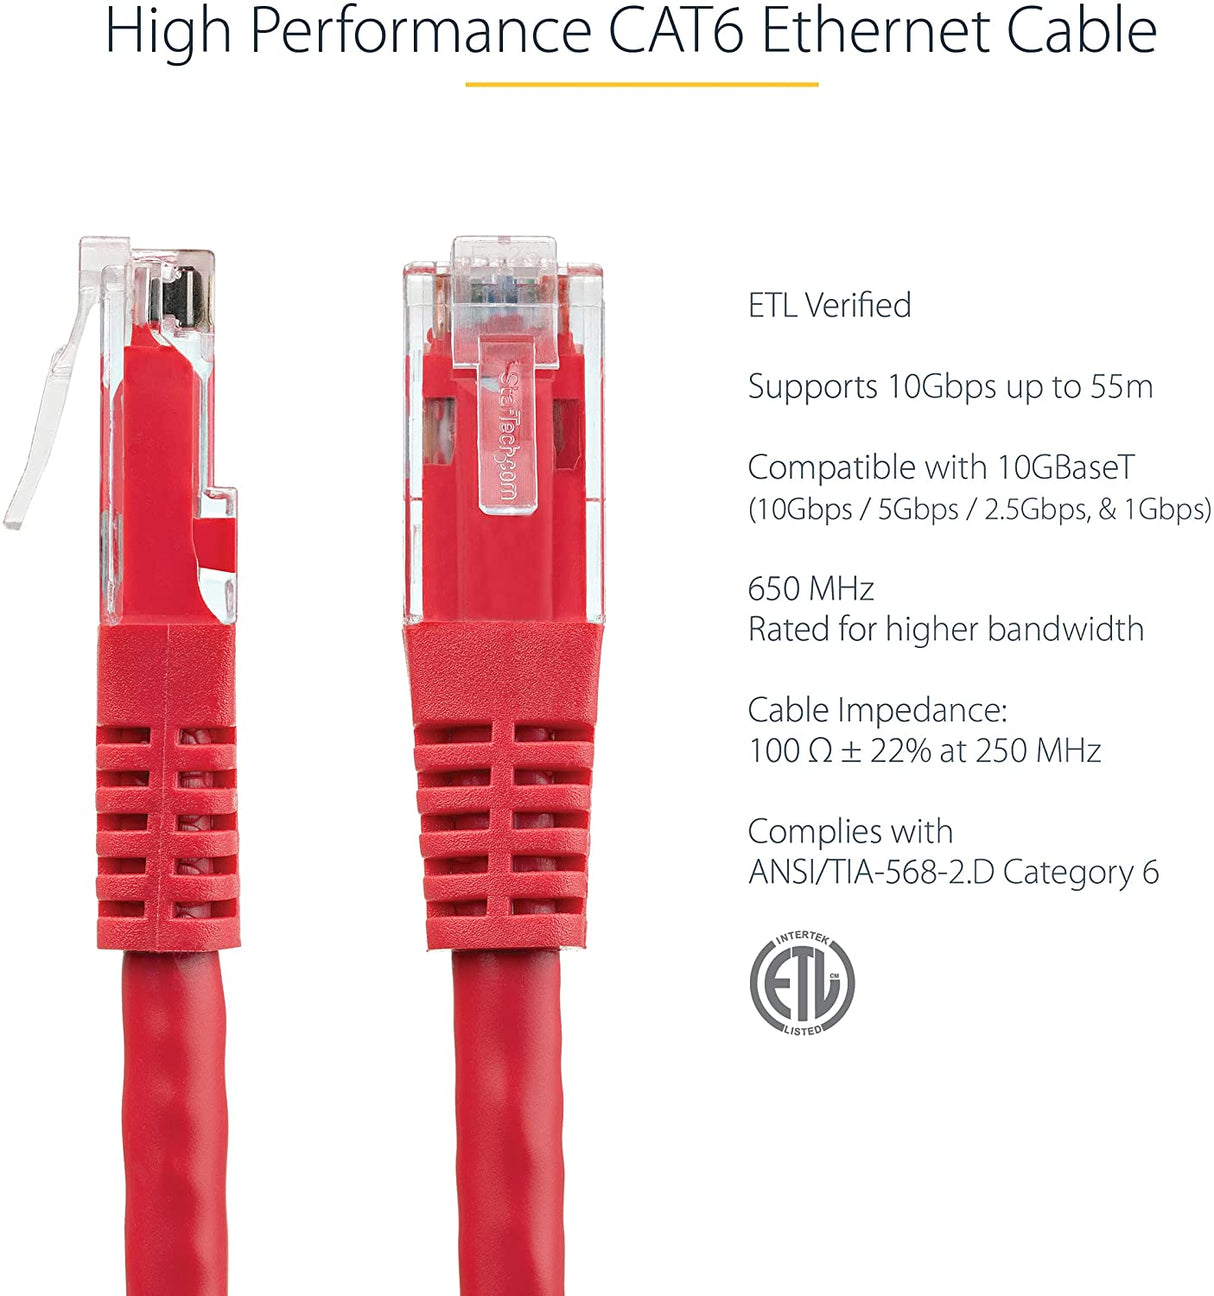 StarTech.com 1ft CAT6 Ethernet Cable - Red CAT 6 Gigabit Ethernet Wire -650MHz 100W PoE++ RJ45 UTP Molded Category 6 Network/Patch Cord w/Strain Relief/Fluke Tested UL/TIA Certified (C6PATCH1RD) Red 1 ft / 0.3 m 1 Pack